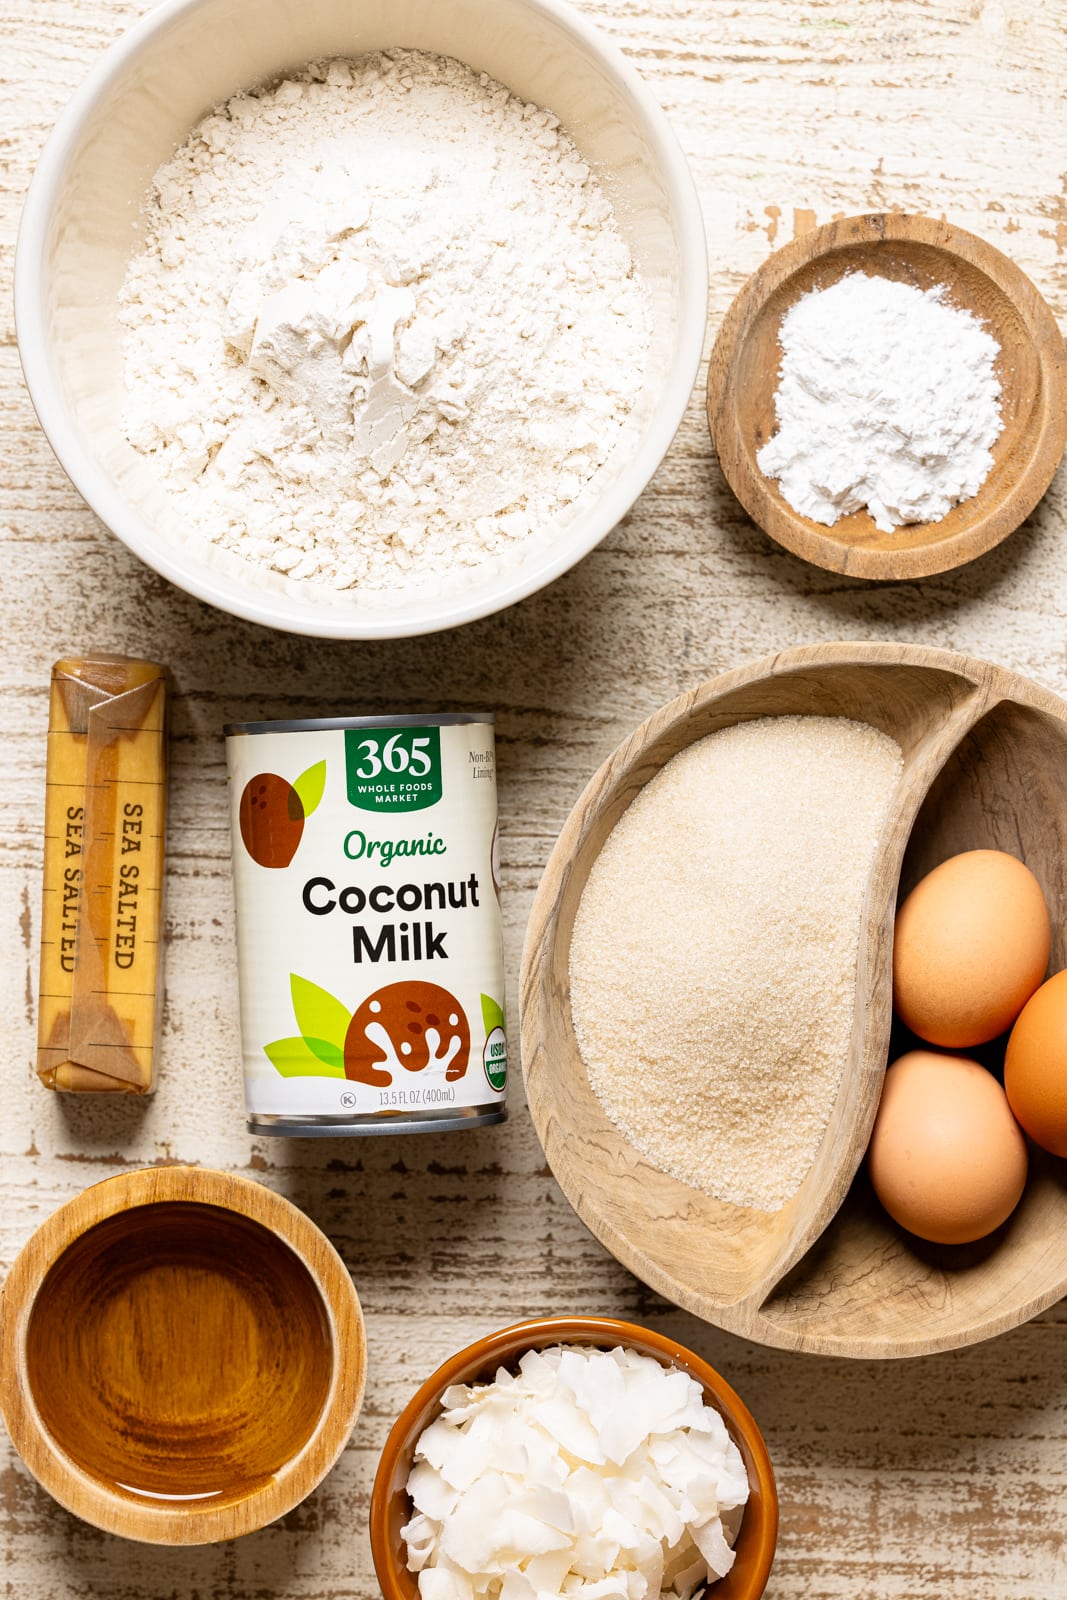 Ingredients including flour, eggs, sugar, coconut flakes, butter, coconut milk, and dry ingredients. 